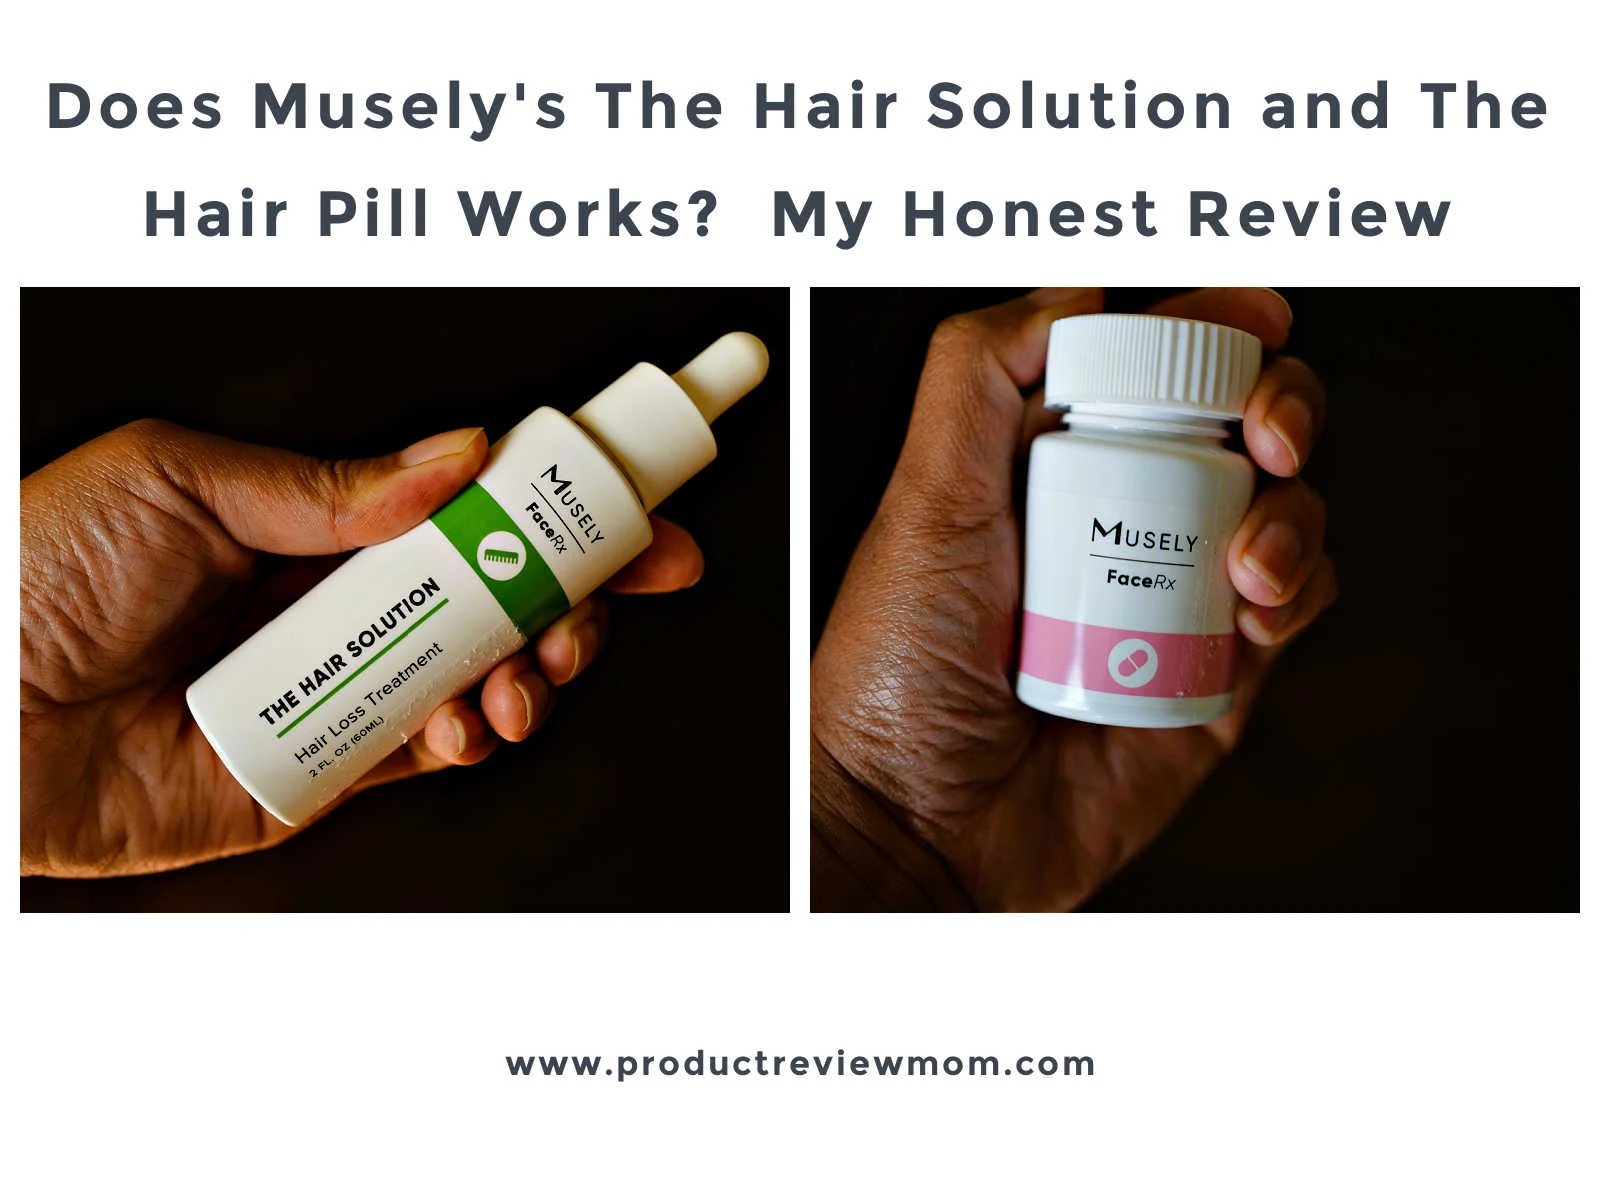 Does Musely's The Hair Solution and The Hair Pill Works?  My Honest Review